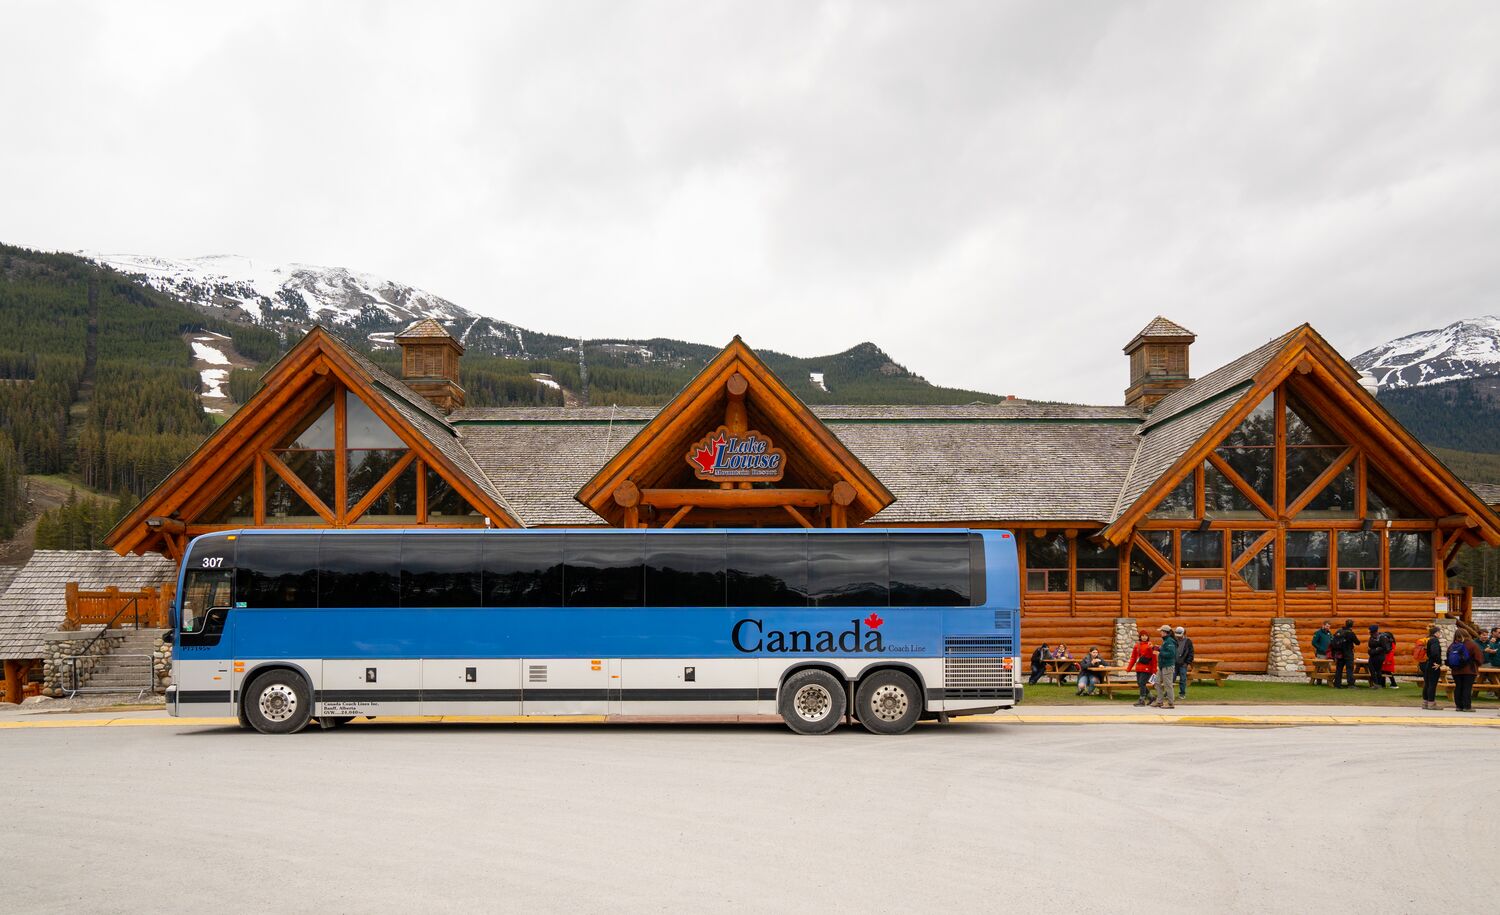 Parks Canada shuttle bus parked in front of the Lake Louise Ski Resort ready to take people to Lake Louise.